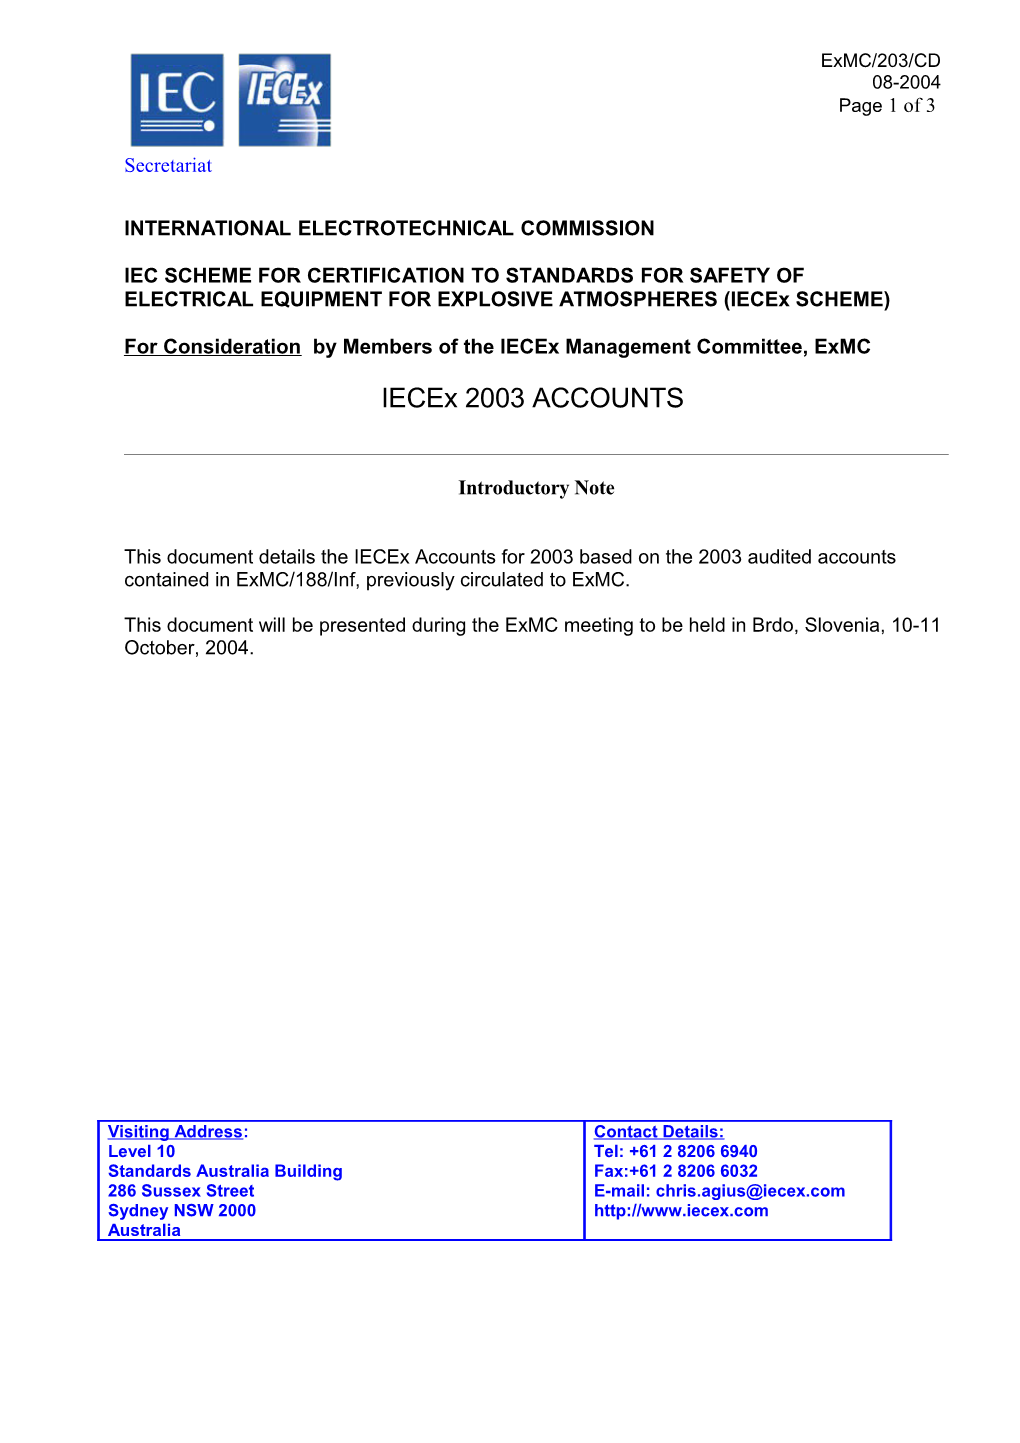 PROPOSED 1999 BUDGET for the Iecex SCHEME